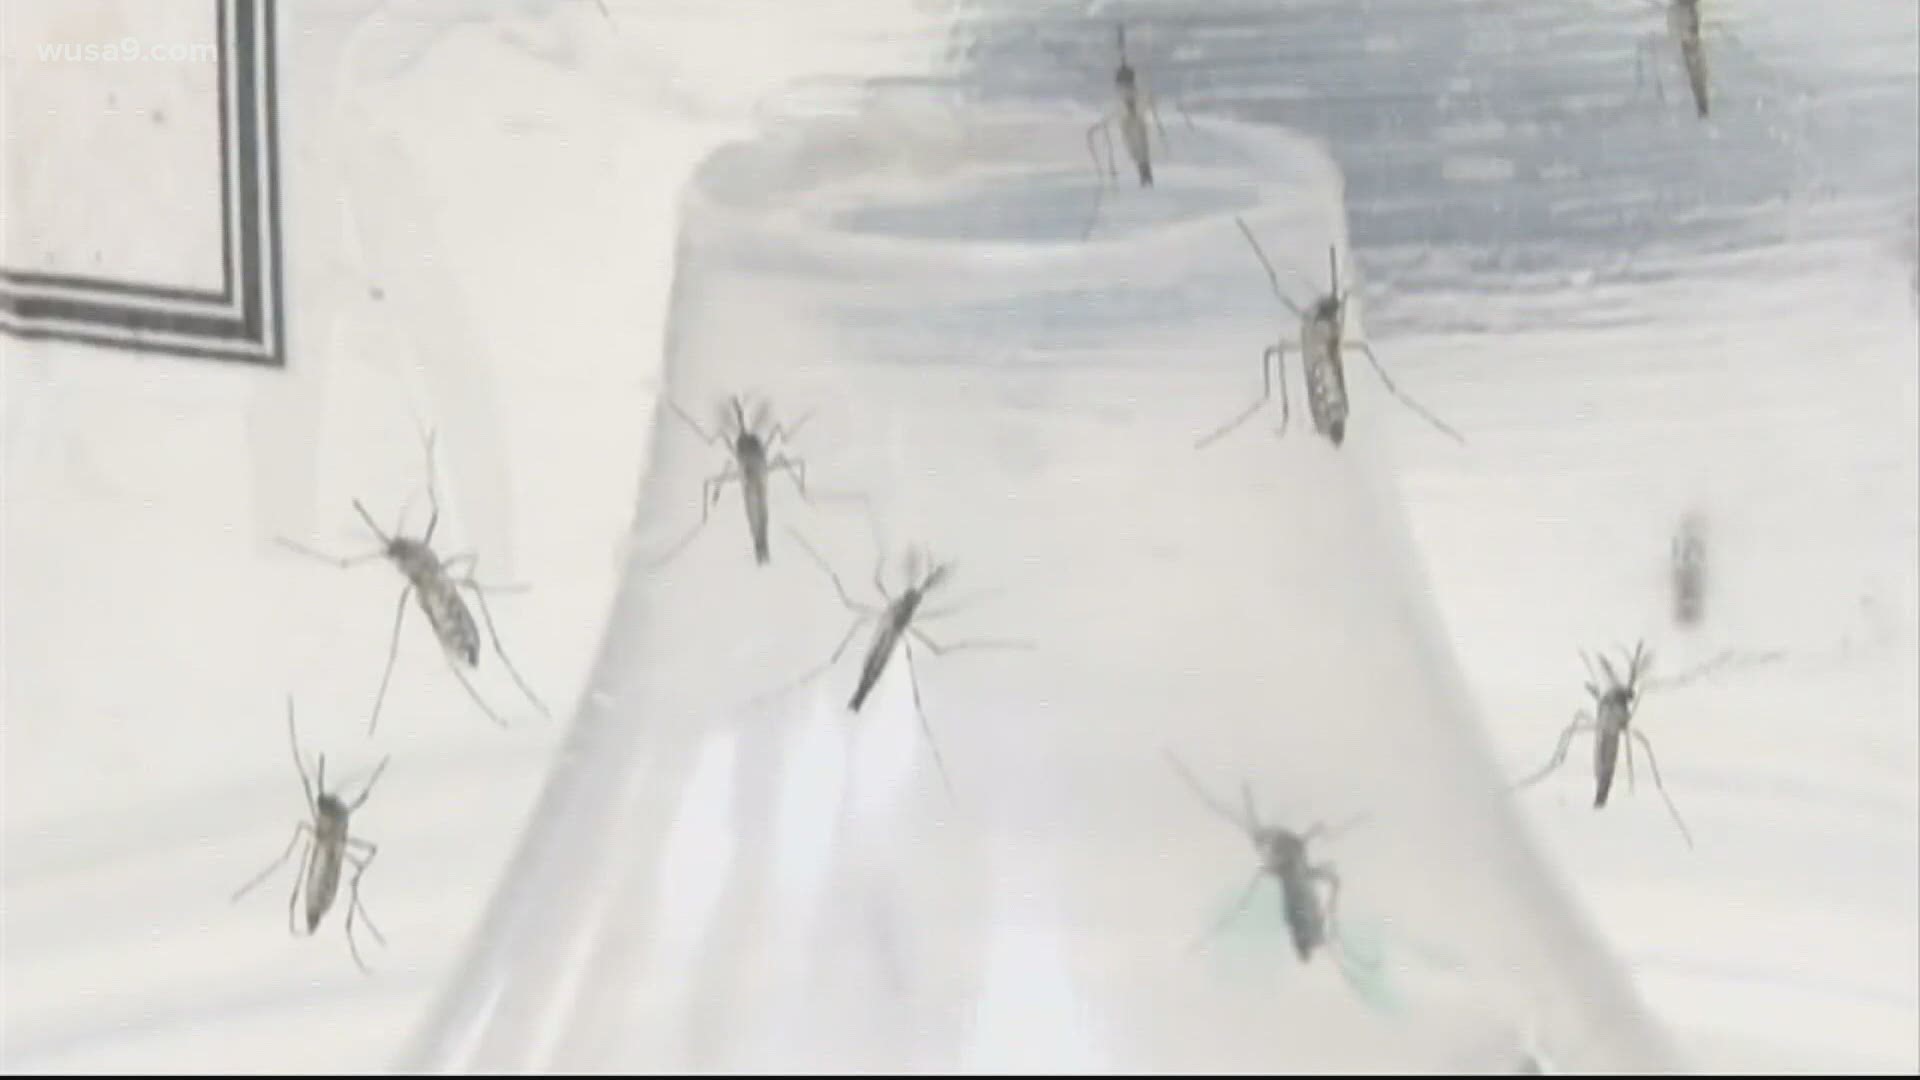 Entomologist Dr. Floyd Shockley says it's hard to say if this is true as we are still in the middle of breeding season for mosquitoes